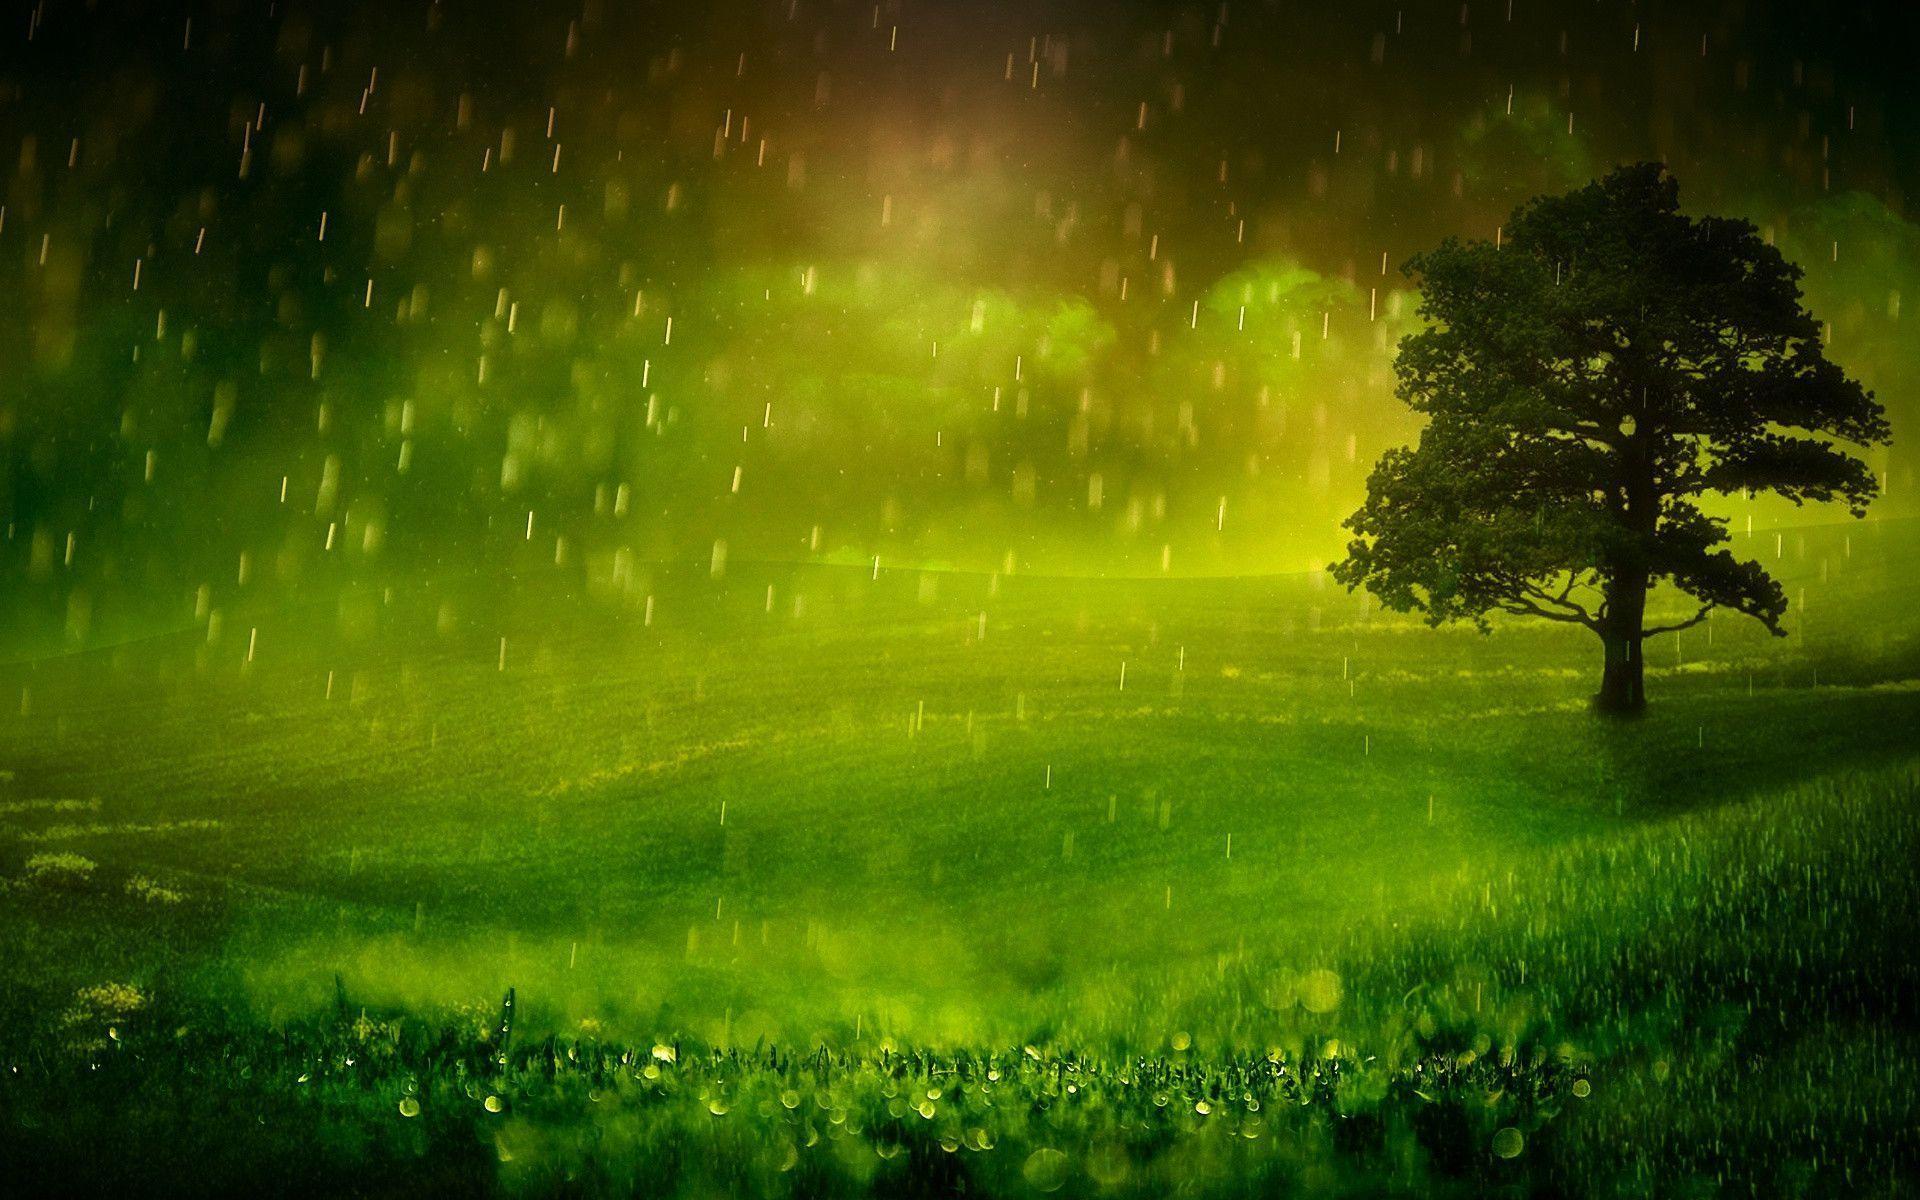 Raining Water Over Green Field Free and Wallpaper